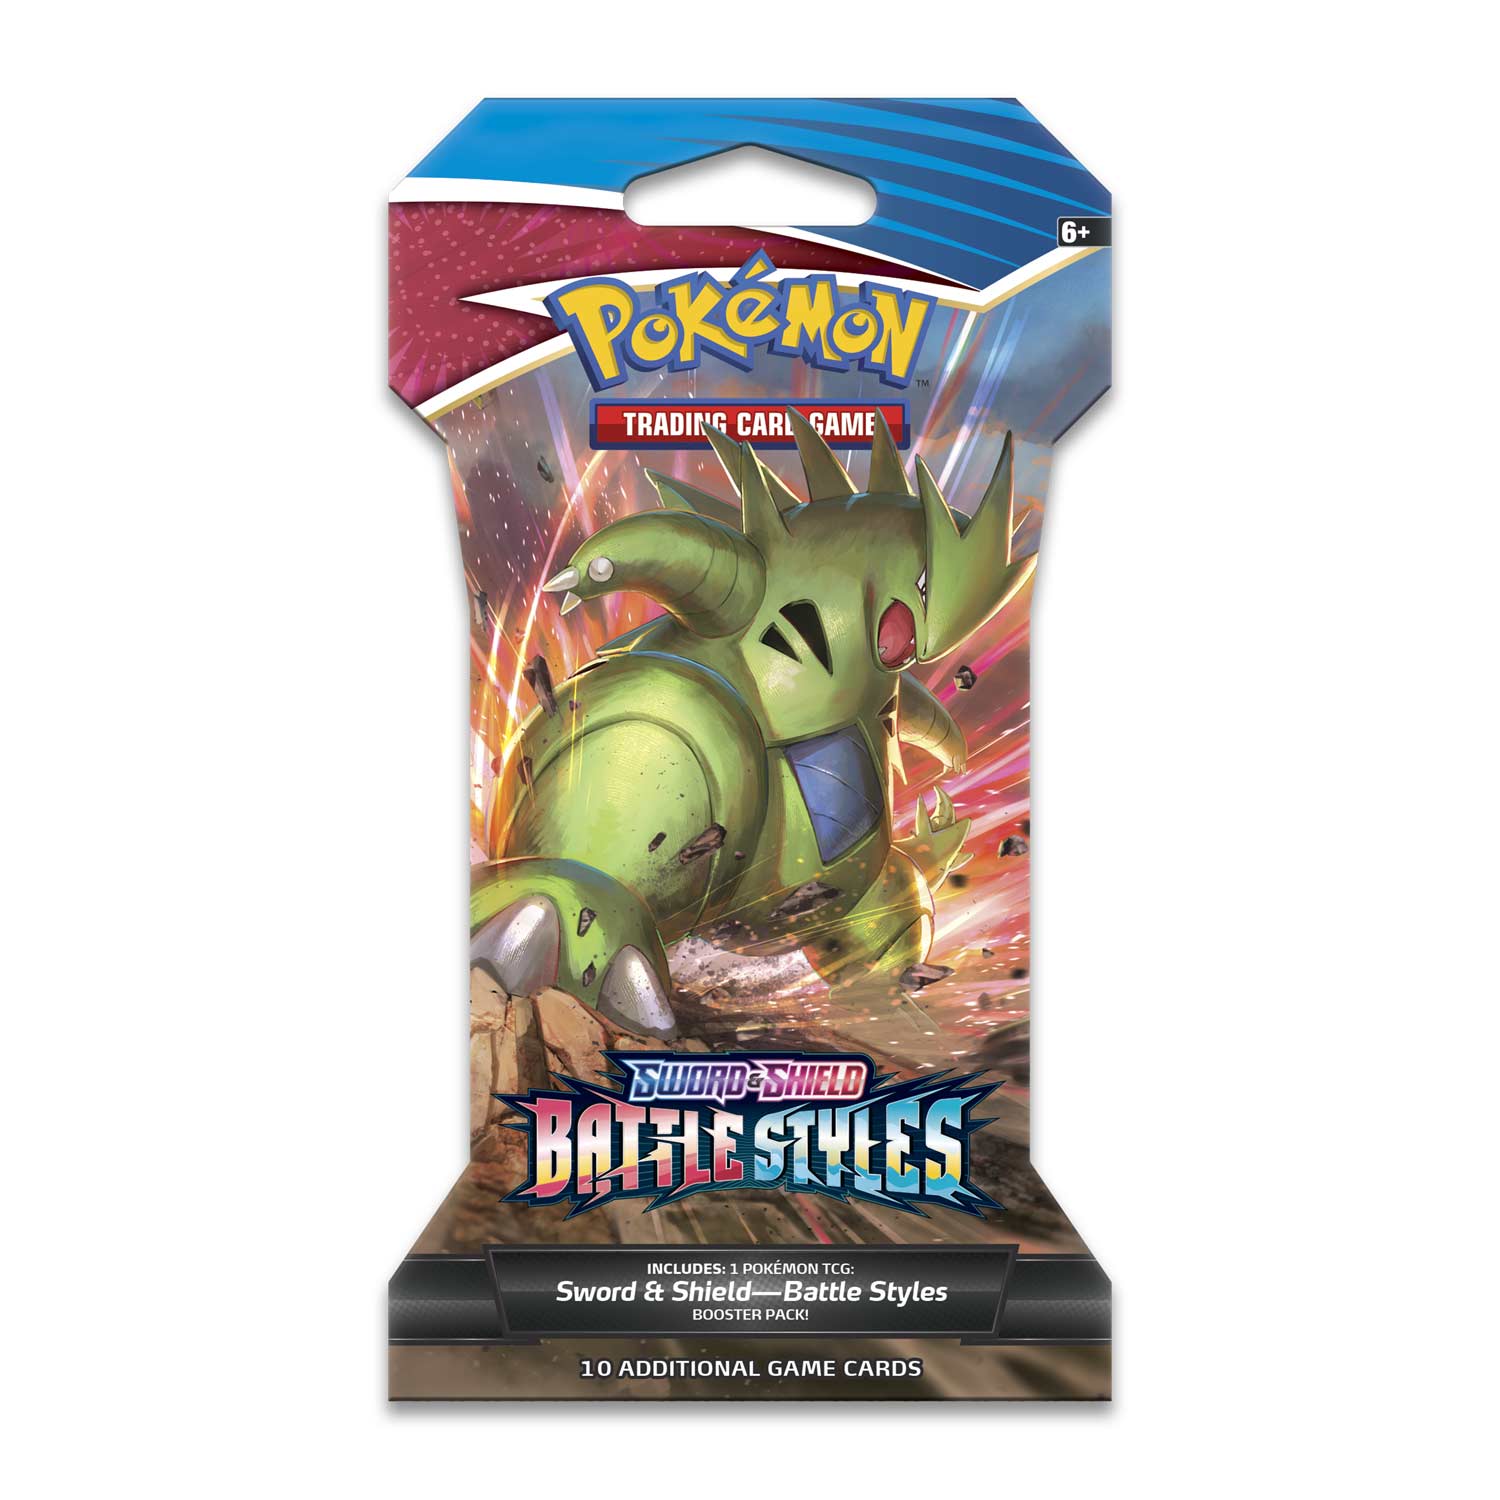 36x SWSH Battle Styles Sealed Pokemon Booster Packs AUTHENTIC UNWEIGHED